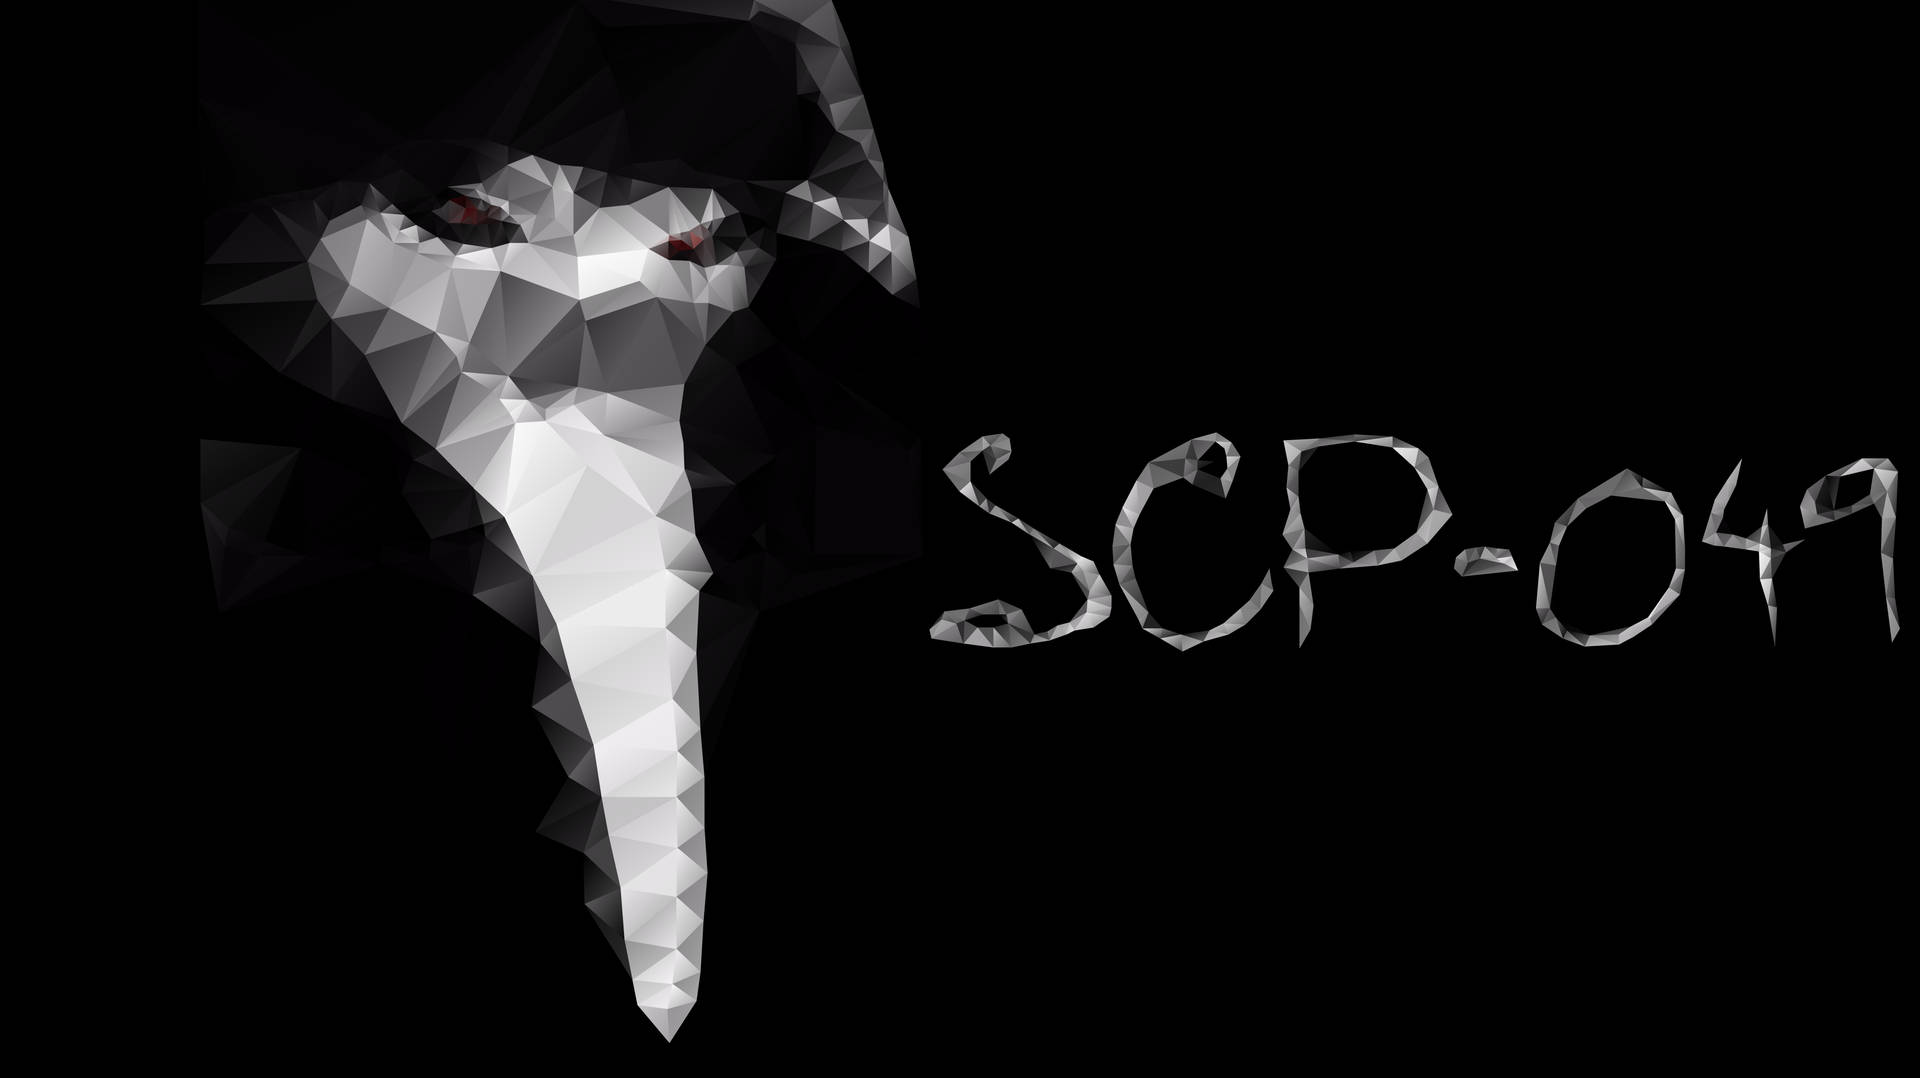 Scp Plague Doctor With Black Backdrop